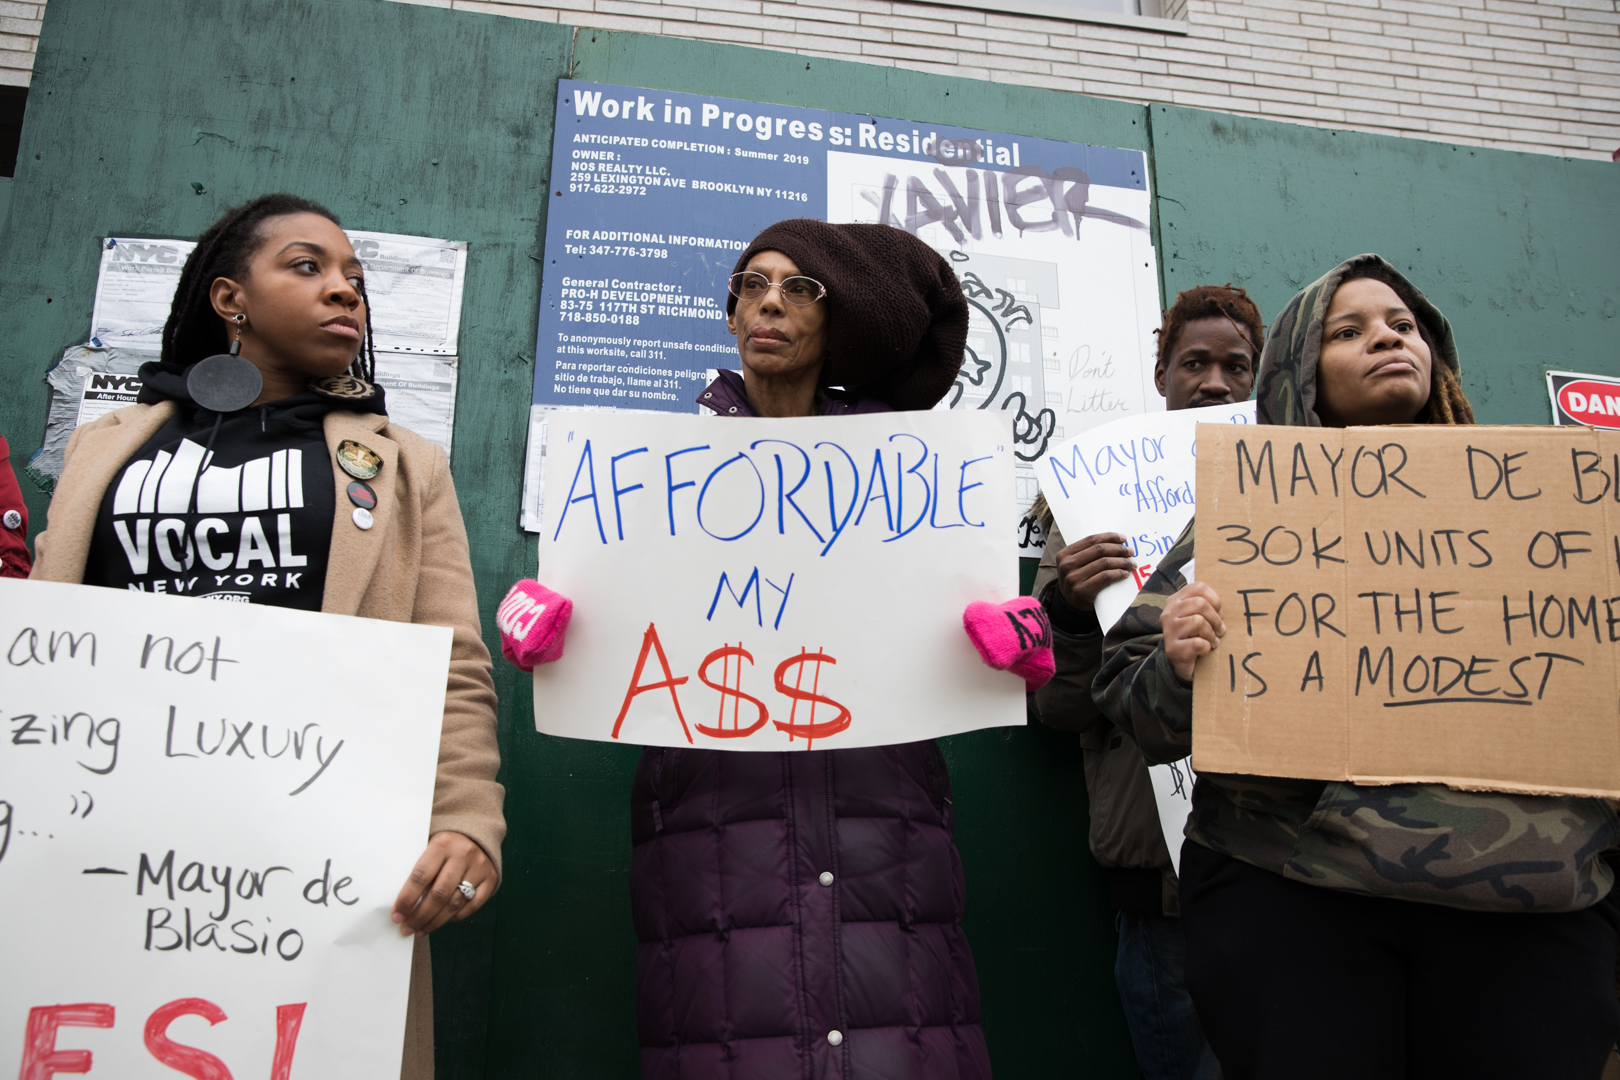 Housing advocates gathered outside 348 Nostrand Ave. to demand the city offer truly affordable housing and units for homeless New Yorkers. Photo: Paul Frangipane/Brooklyn Eagle